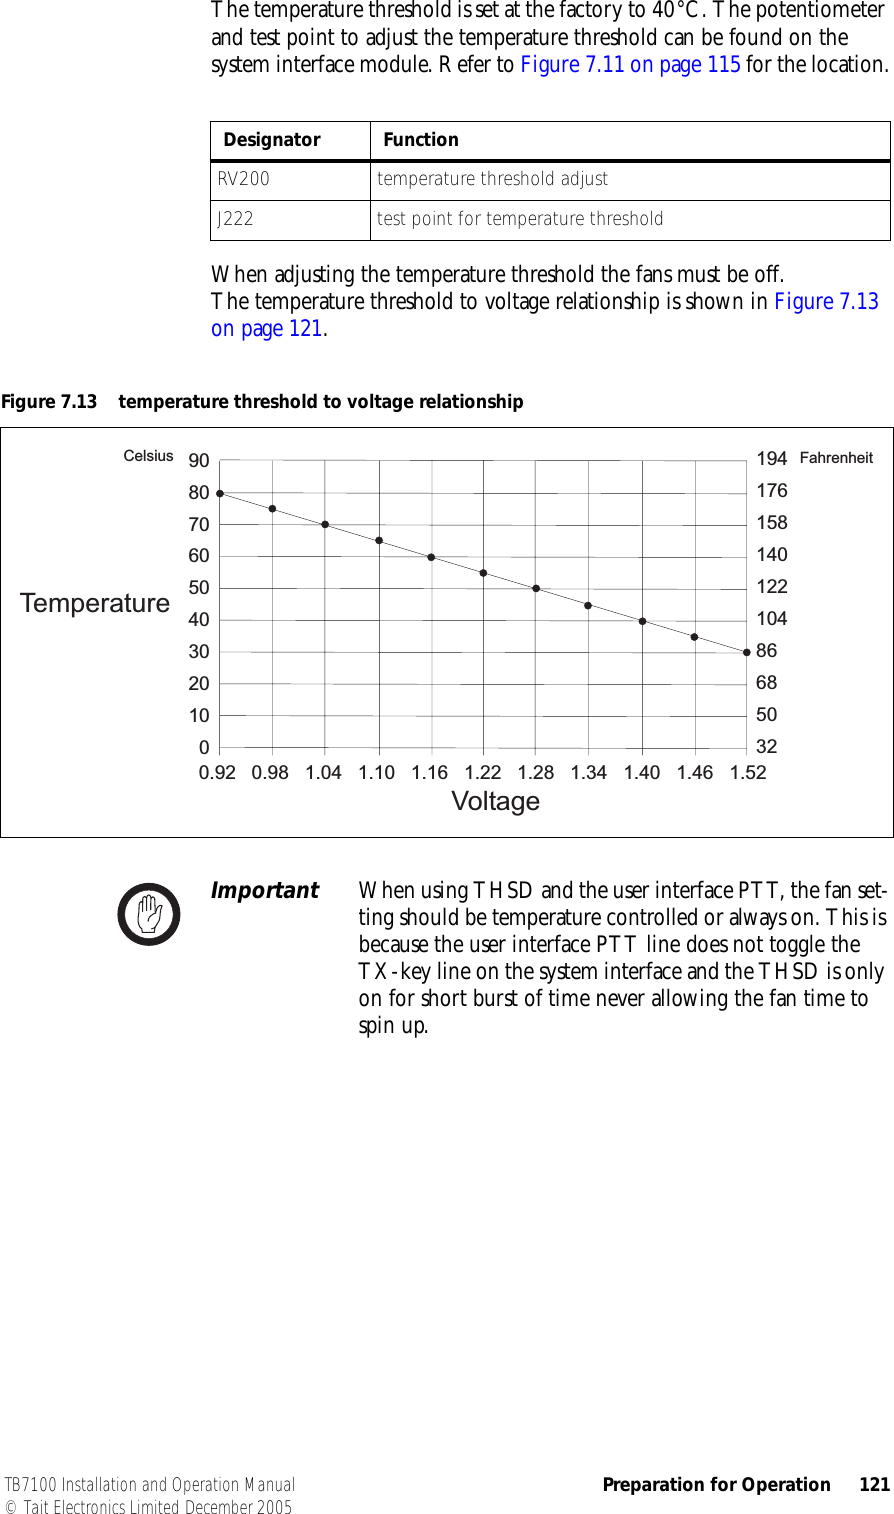  TB7100 Installation and Operation Manual Preparation for Operation 121© Tait Electronics Limited December 2005The temperature threshold is set at the factory to 40°C. The potentiometer and test point to adjust the temperature threshold can be found on the system interface module. Refer to Figure 7.11 on page 115 for the location.When adjusting the temperature threshold the fans must be off. The temperature threshold to voltage relationship is shown in Figure 7.13 on page 121.Important When using THSD and the user interface PTT, the fan set-ting should be temperature controlled or always on. This is because the user interface PTT line does not toggle the TX-key line on the system interface and the THSD is only on for short burst of time never allowing the fan time to spin up.Designator FunctionRV200 temperature threshold adjustJ222 test point for temperature thresholdFigure 7.13 temperature threshold to voltage relationship0.92 0.98 1.04 1.10 1.16 1.22 1.28 1.34 1.40 1.46 1.520102030405060708090VoltageTemperature50688610412214015817619432FahrenheitCelsius